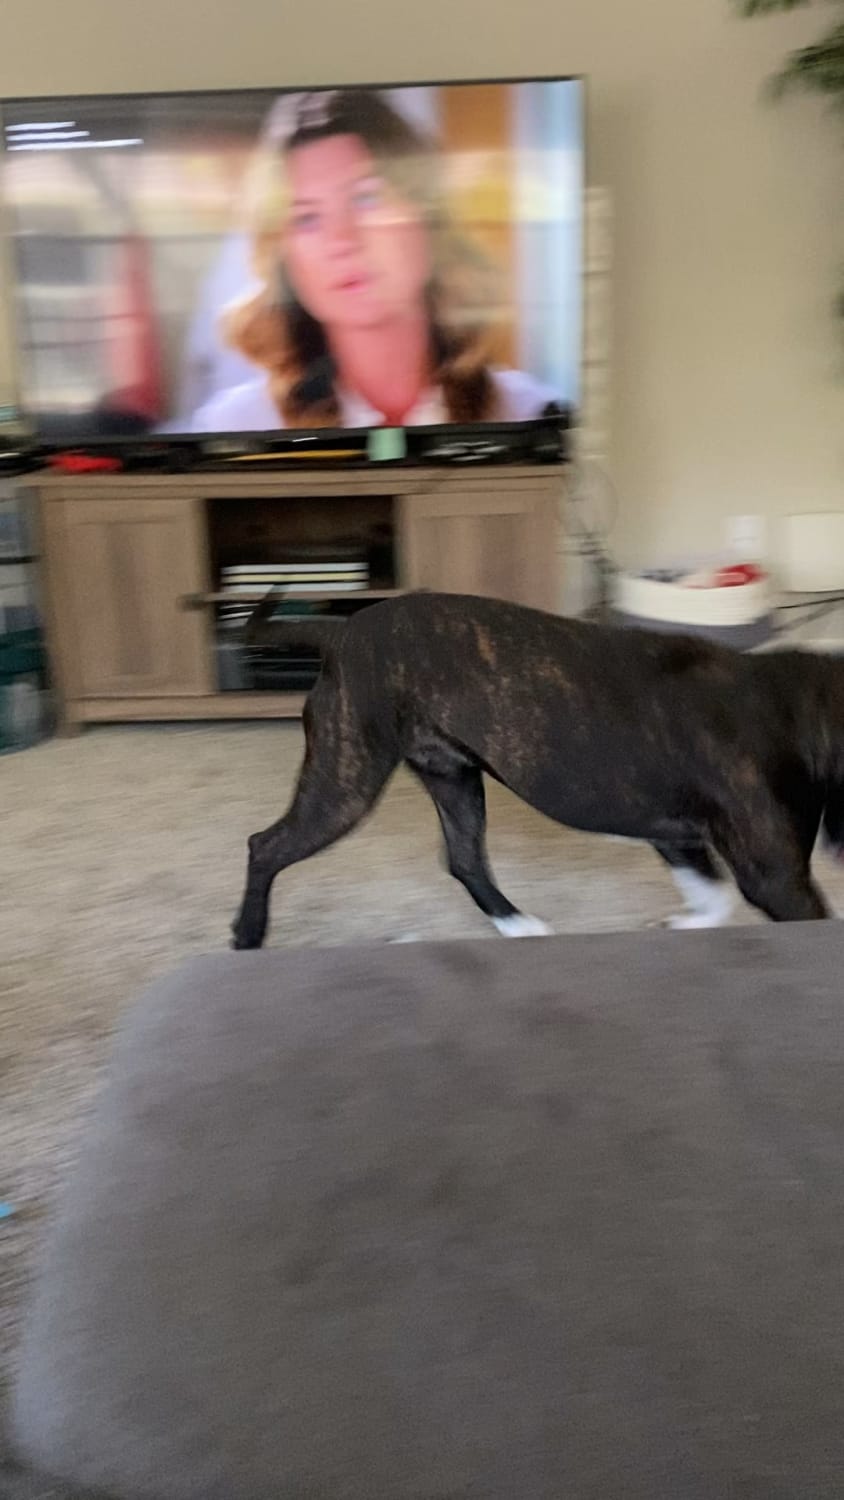 We brought Buck home less than a week ago. He decided to show us his zoomies for the first time today.